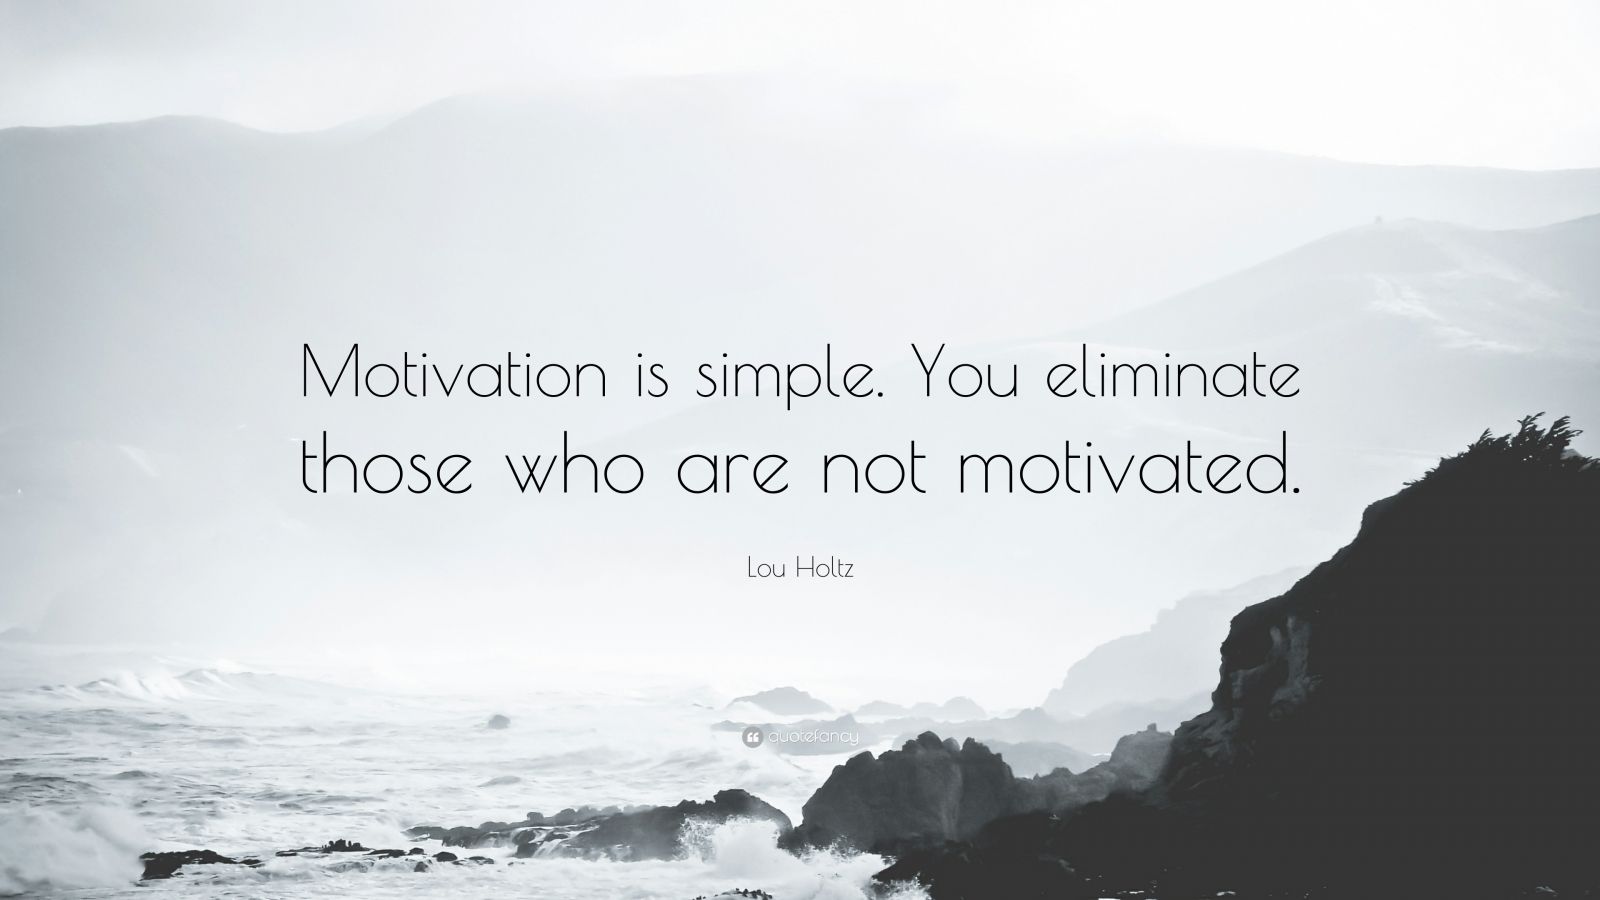 Lou Holtz Quote: “Motivation is simple. You eliminate those who are not